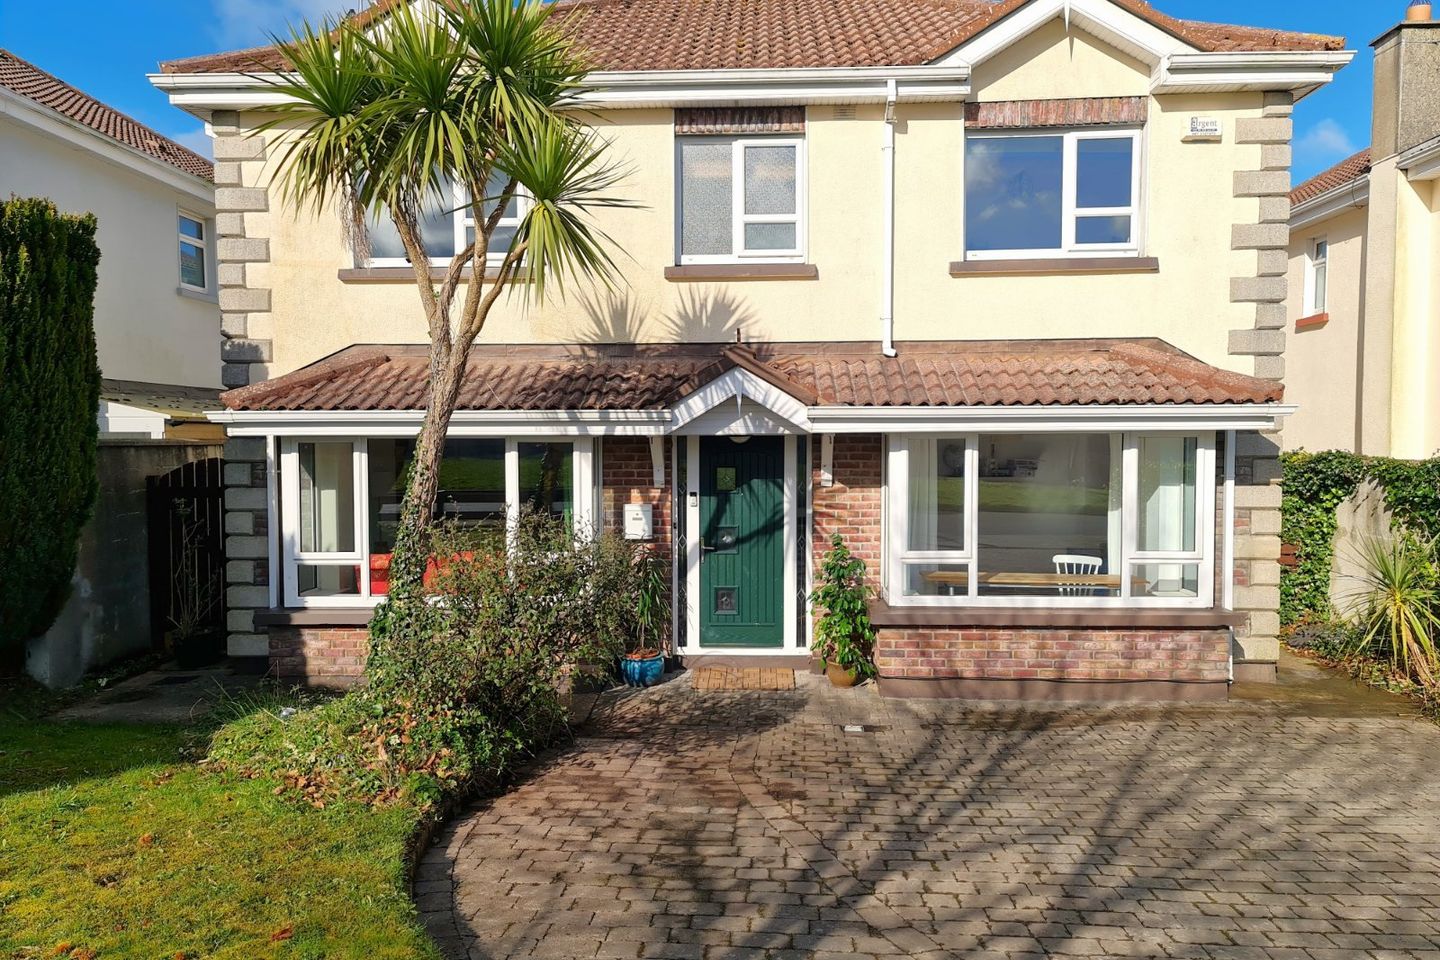 55 Pebble Bay, Friars Hill, Wicklow Town, Co. Wicklow, A67H768